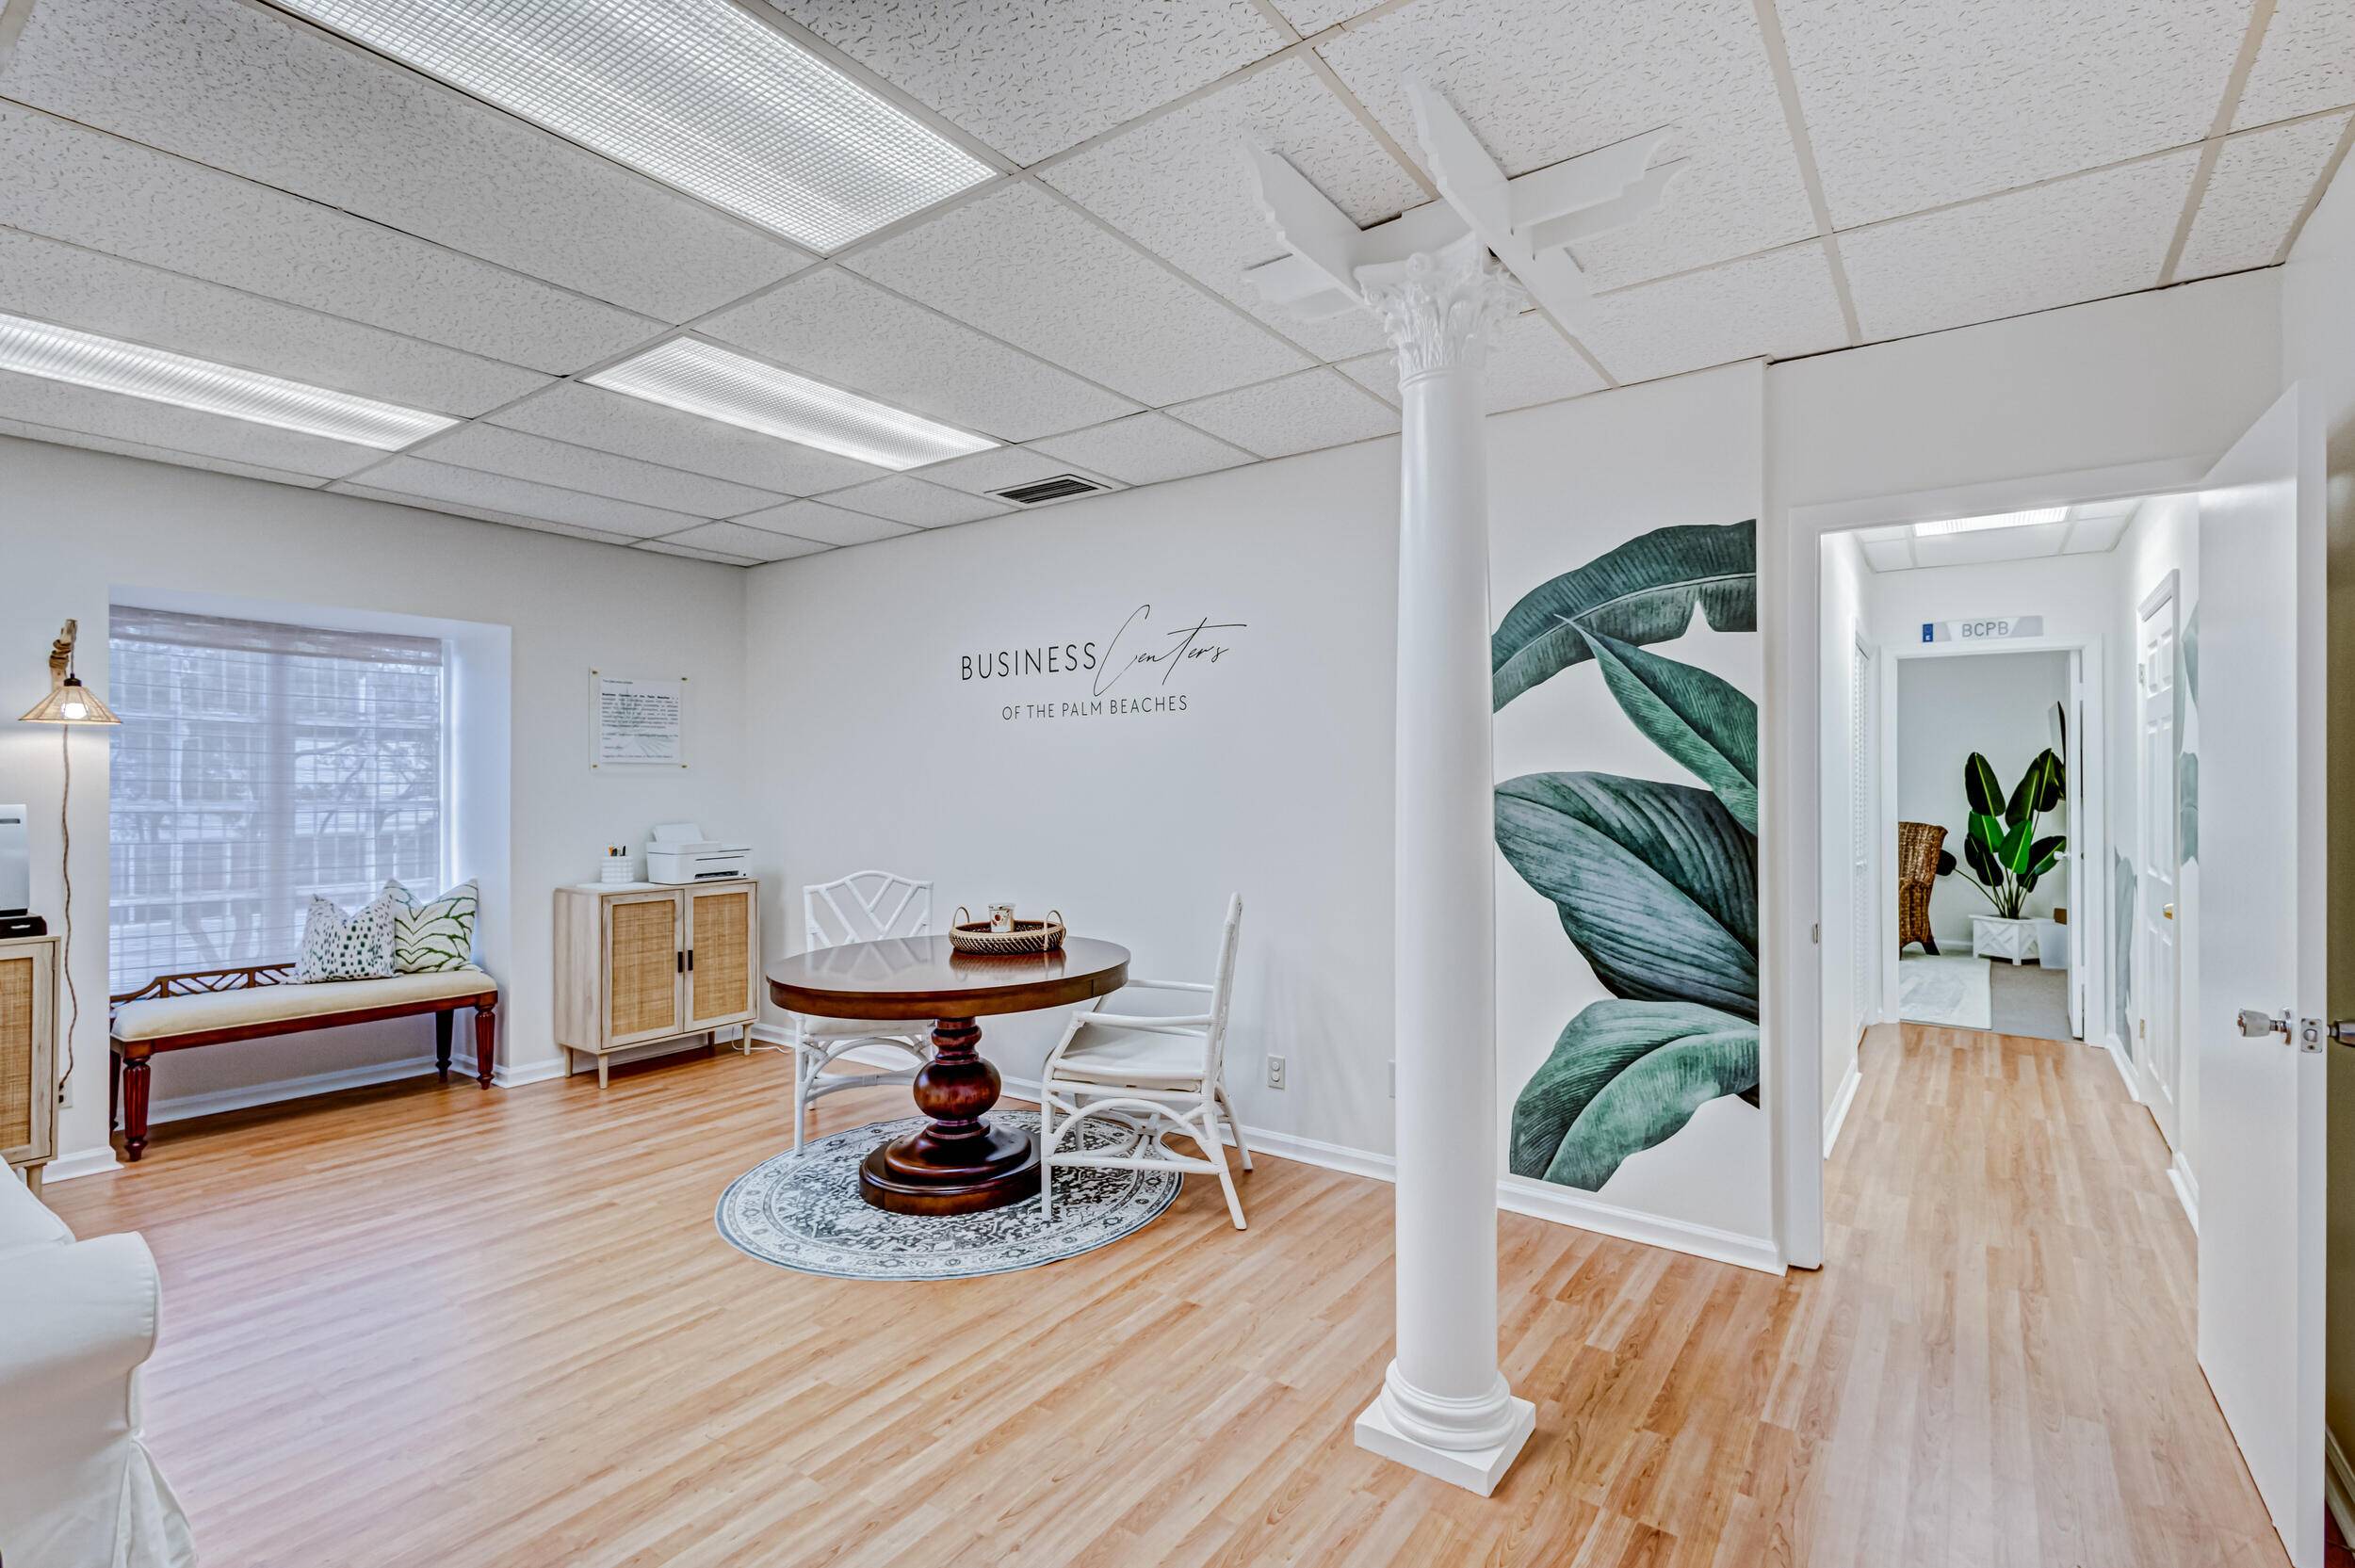 Great for Mediations Meetings Closings Office space available with flexible terms can use full time, Seasonal, or as Coworking space Perfect for independent contractors and remote workers needing out of ...